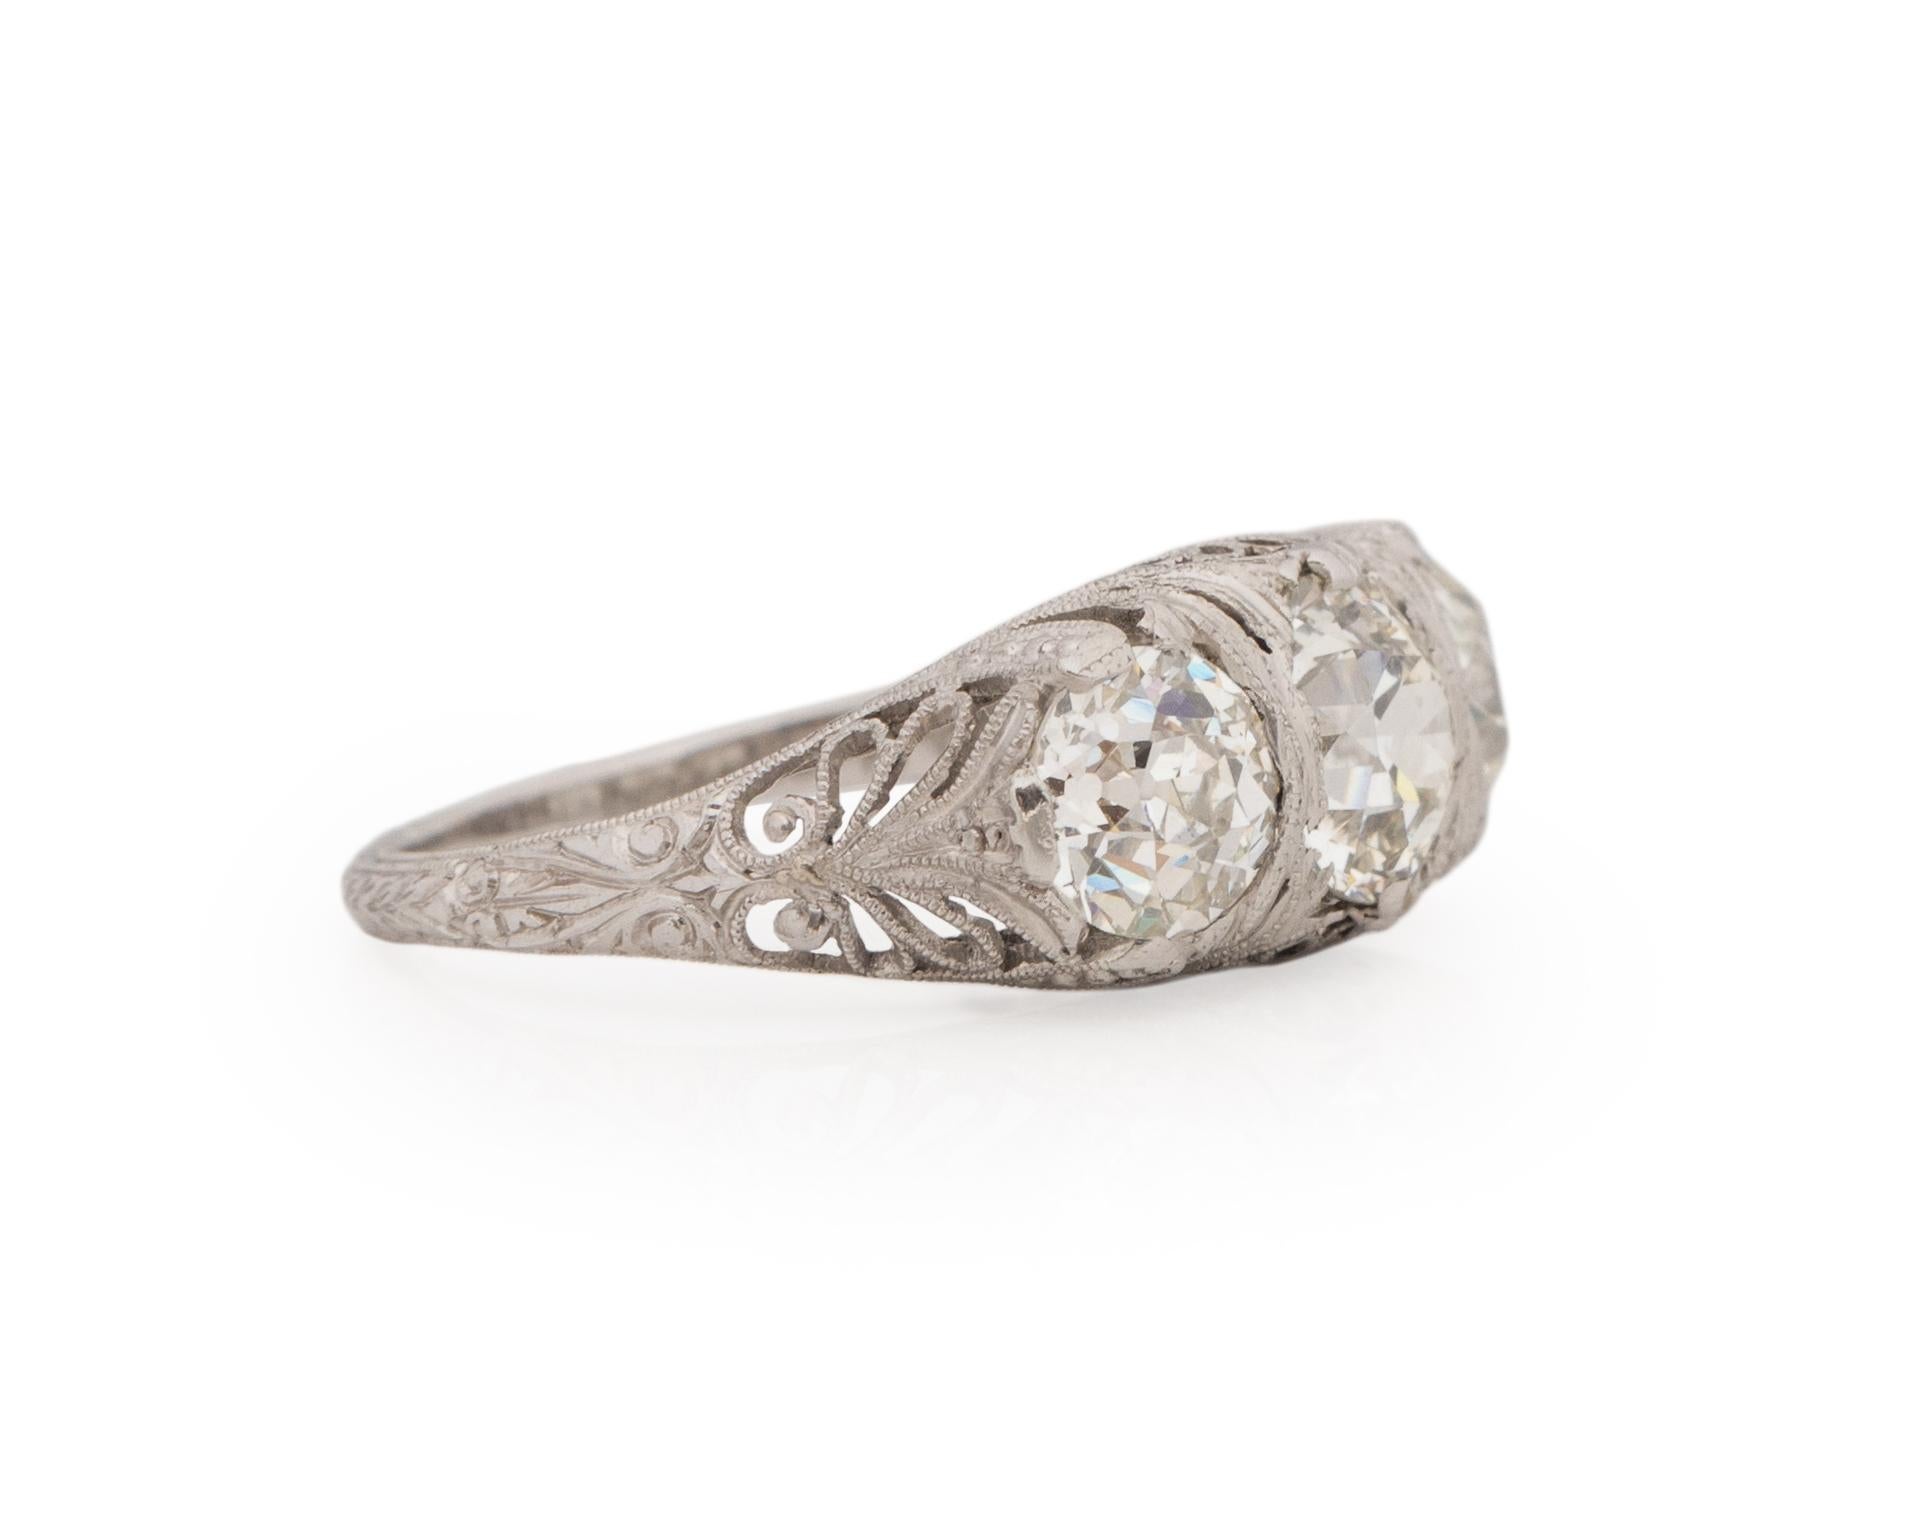 Ring Size: 6.25
Metal Type: Platinum [Hallmarked, and Tested]
Weight: 4.9 grams

Center Diamond Details:
GIA REPORT #: 6224420700
Weight: 1.40ct, total weight
Cut: Old European brilliant
Color: M
Clarity: SI1
Measurements: 7.10mm x 7.03mm x